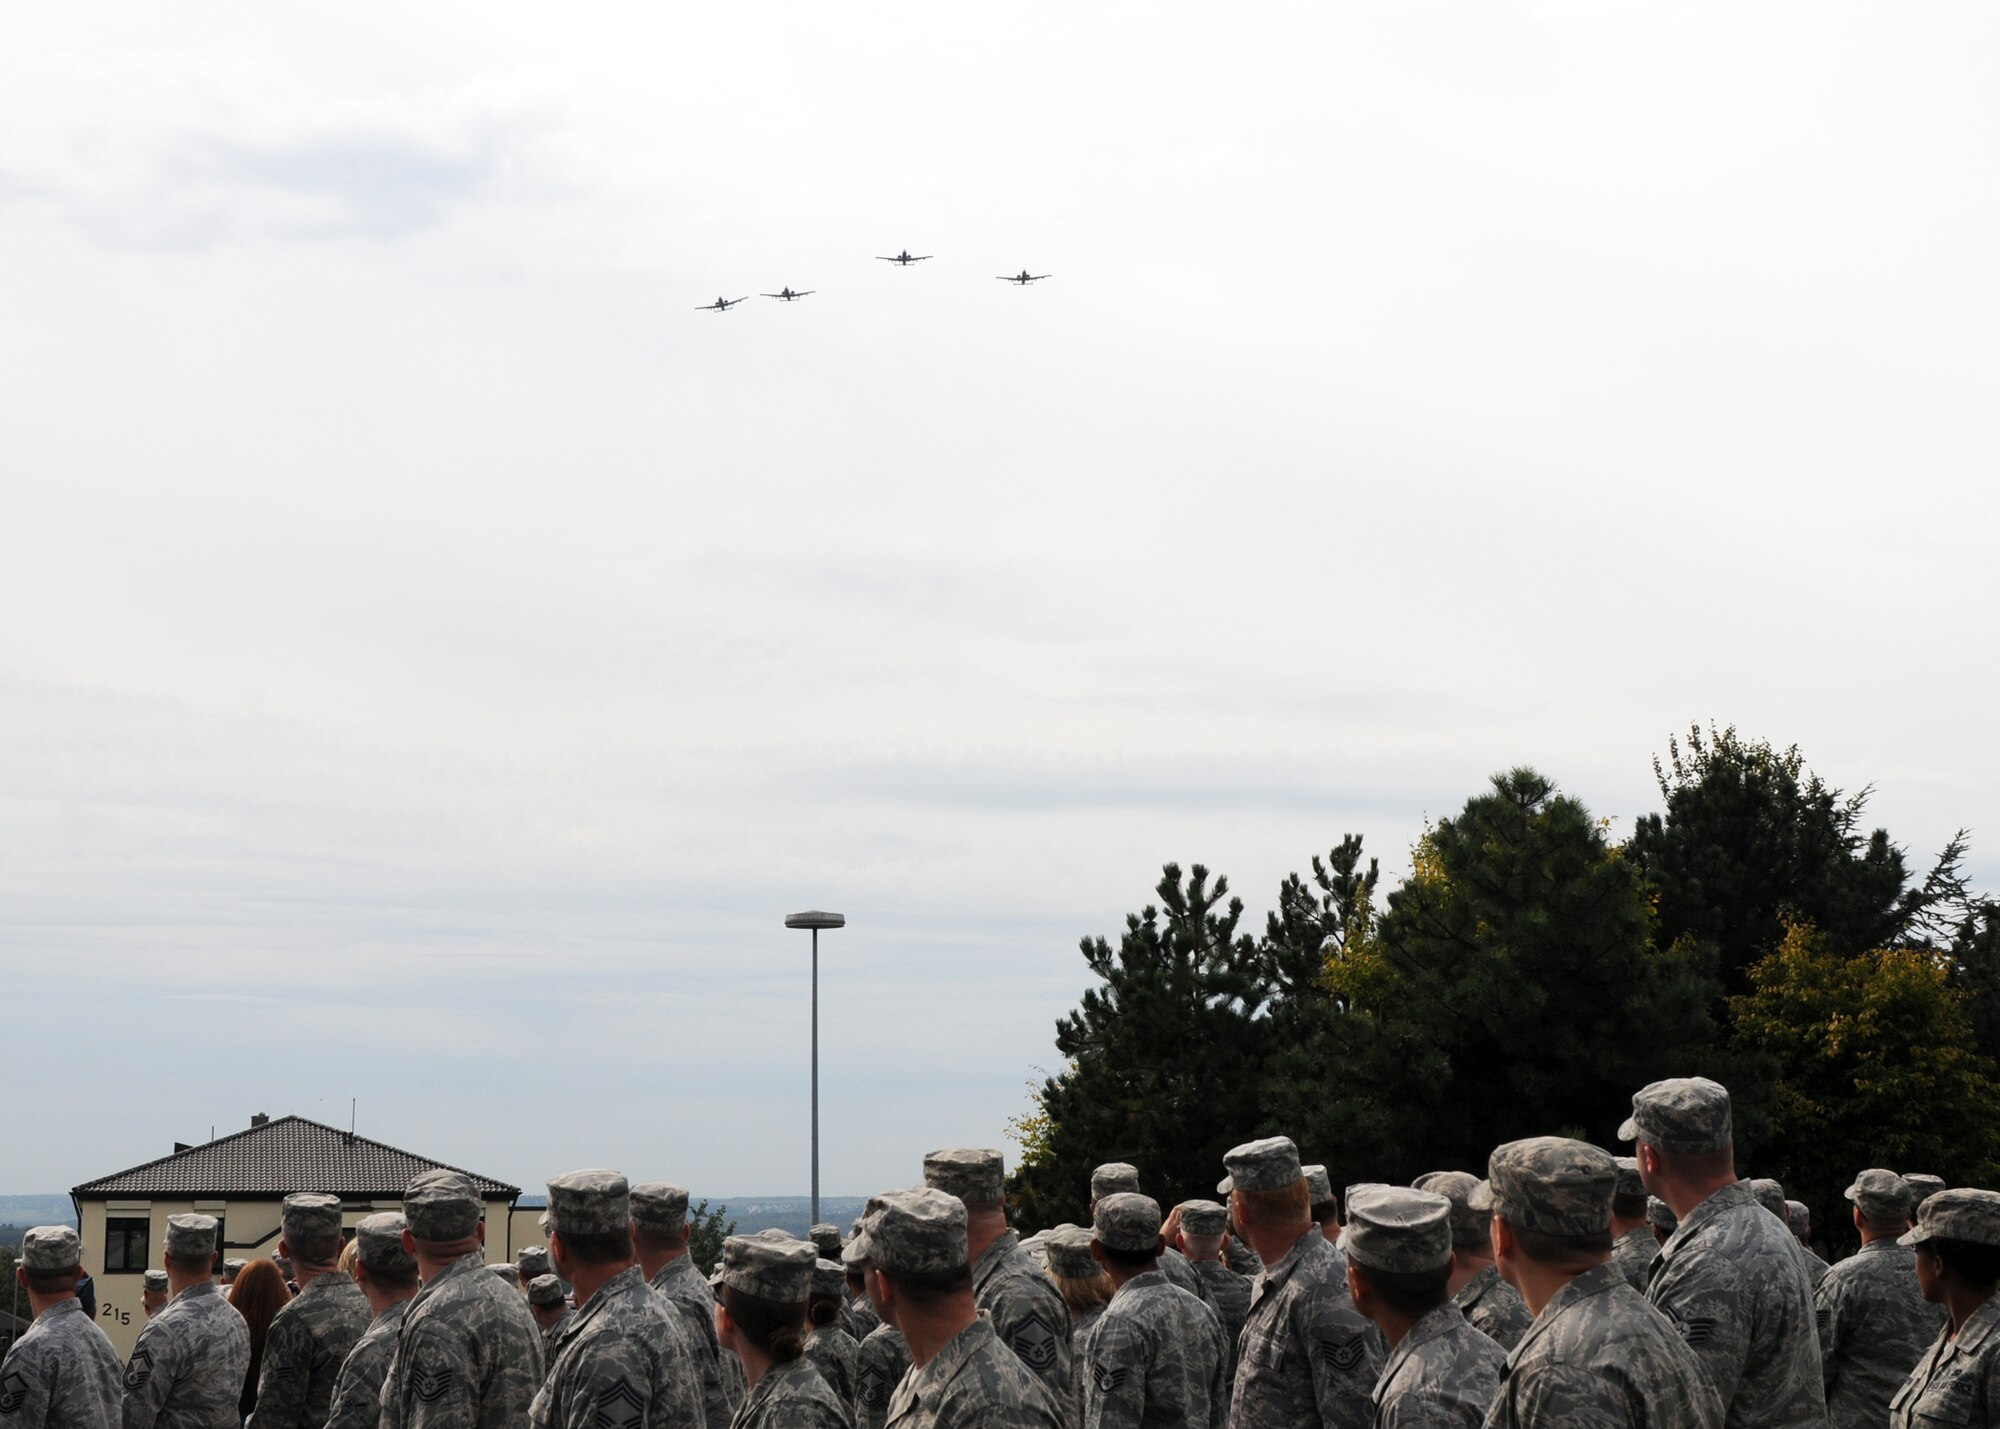 SPANGDAHLEM AIR BASE, Germany – Members of the 52nd Fighter Wing watch as four A-10 Thunderbolt II aircraft from the 81st Fighter Squadron fly over the POW/MIA ceremony at the air park here Sept. 16. The ceremony is held every year to remember those who have served and been taken prisoner or have been listed as missing in action. (U.S. Air Force photo/Senior Airman Christopher Toon) 